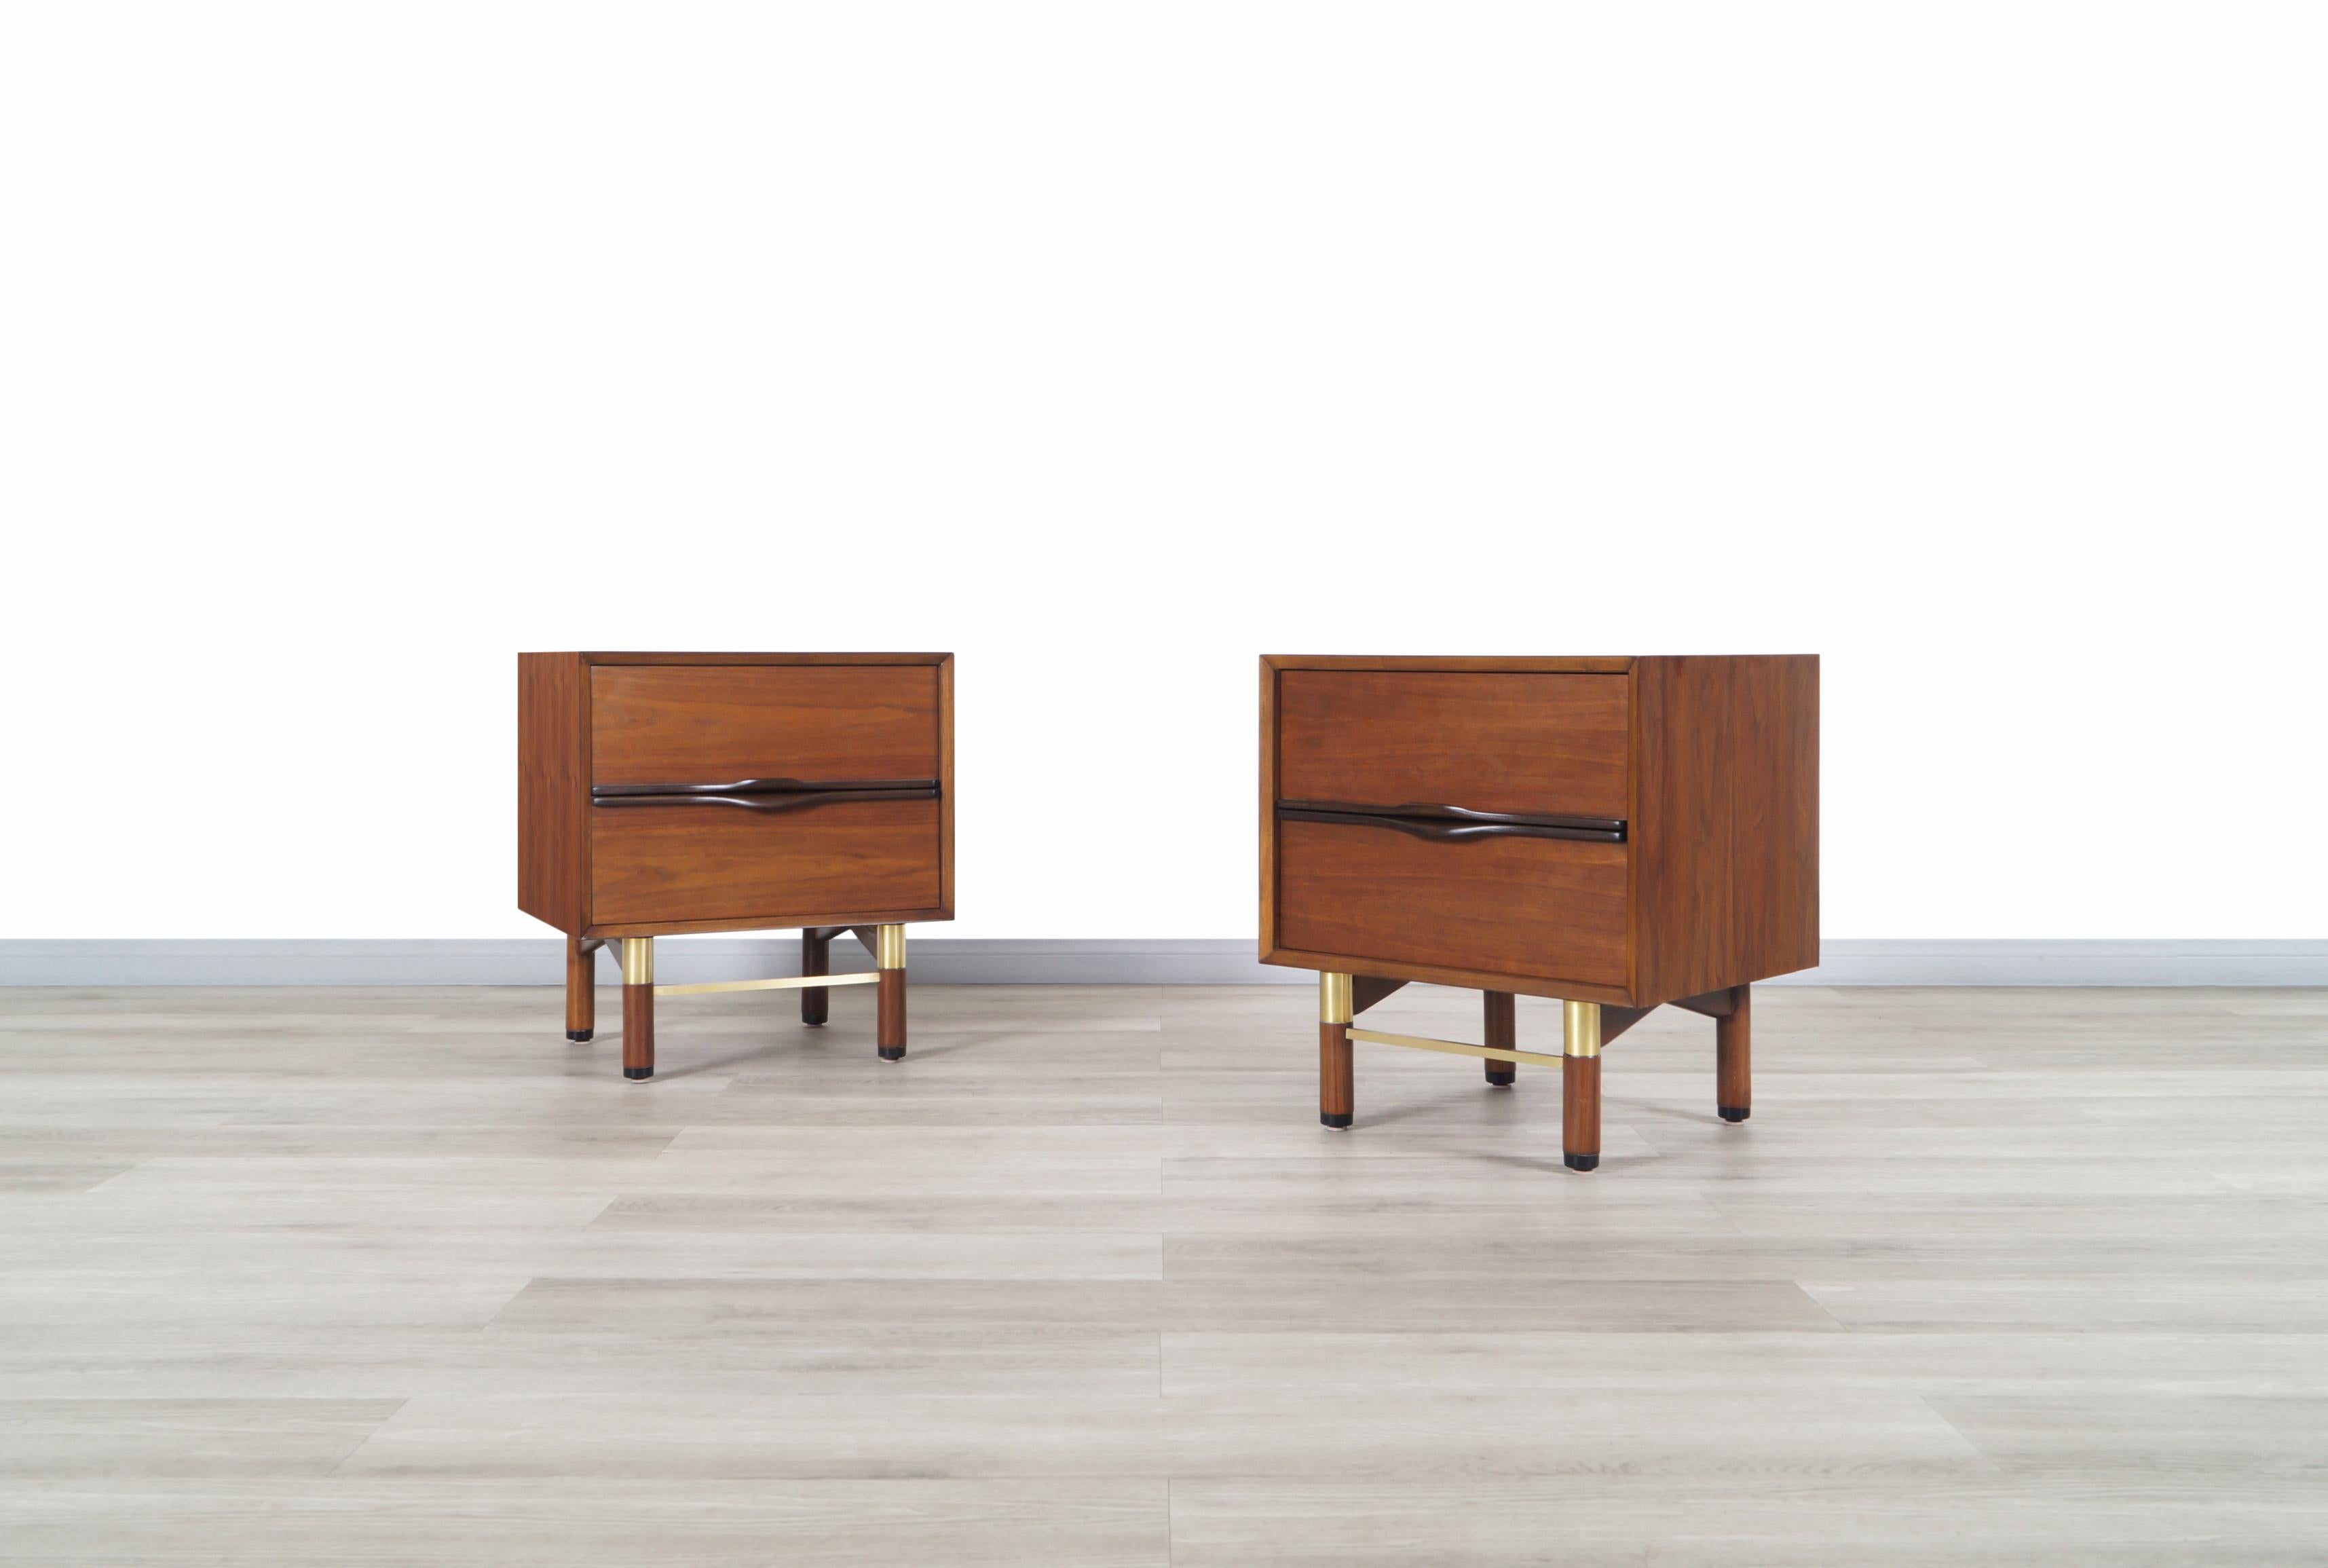 Fabulous mid century walnut and brass nightstands designed and manufactured in the United States, circa 1960s. These nightstands are made of walnut and have a minimalist design, that combined with its construction material, results in elegant and